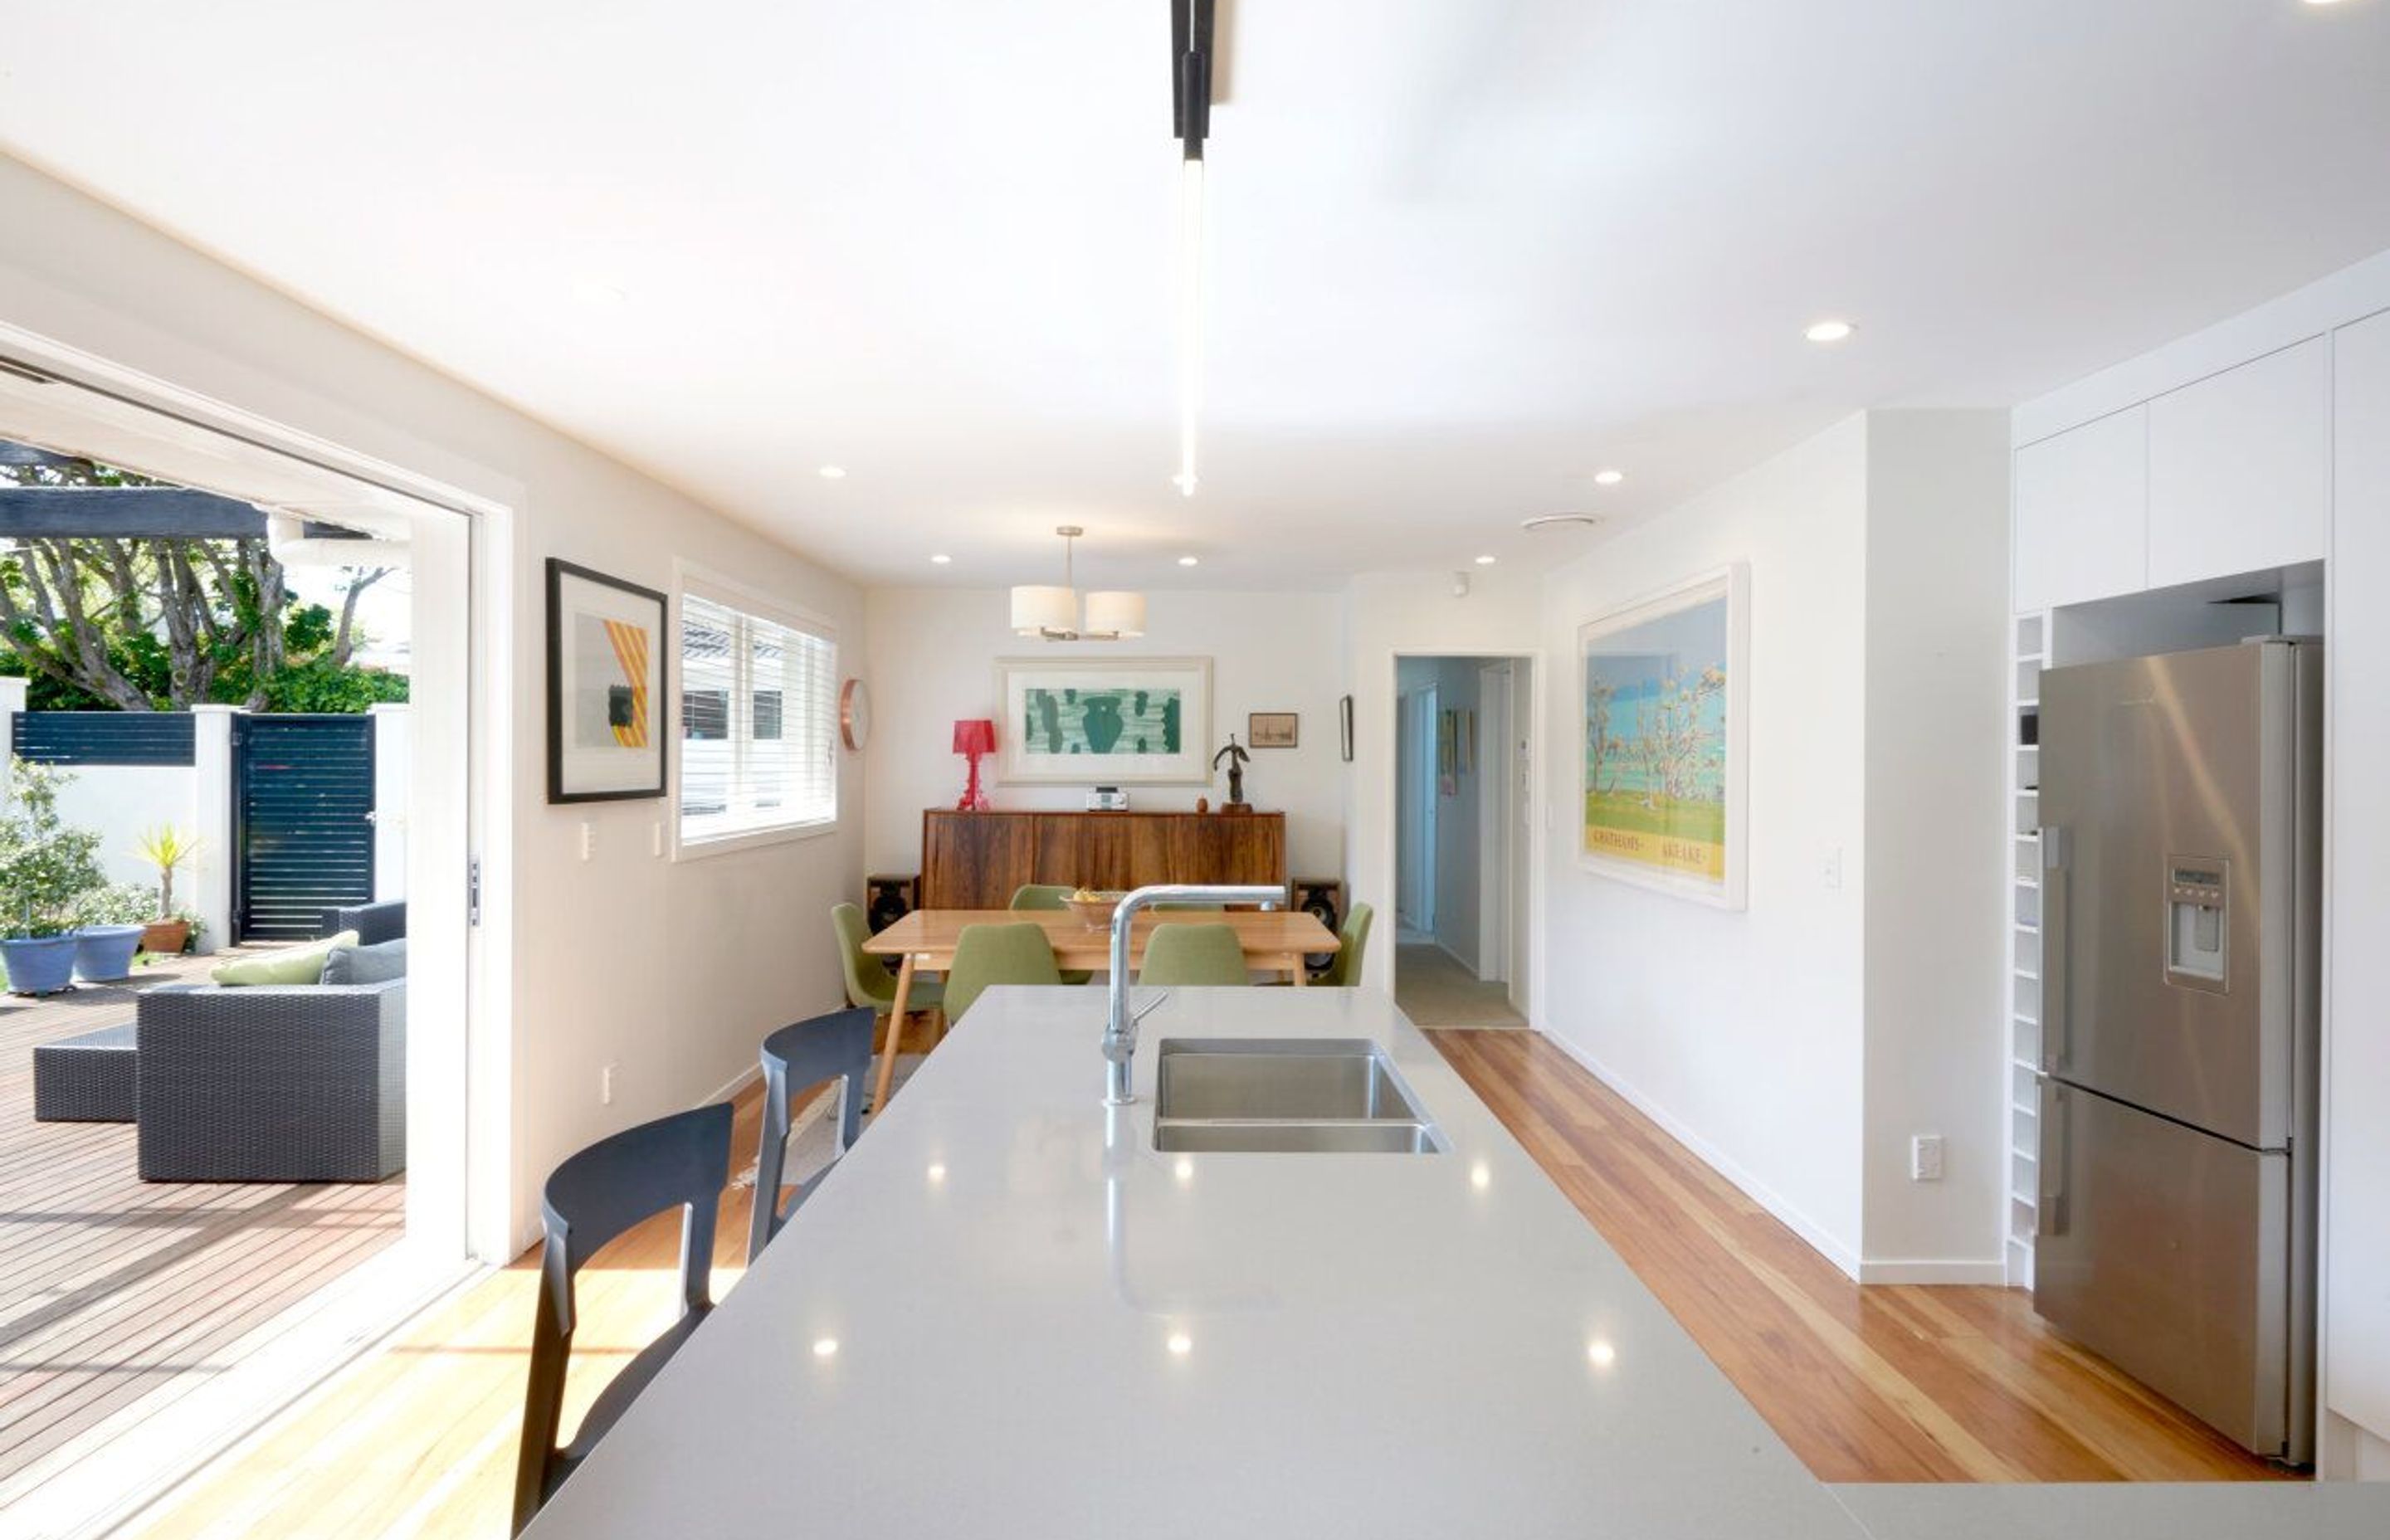 A Flipped Layout and Cohesive Design For This Mount Eden Home